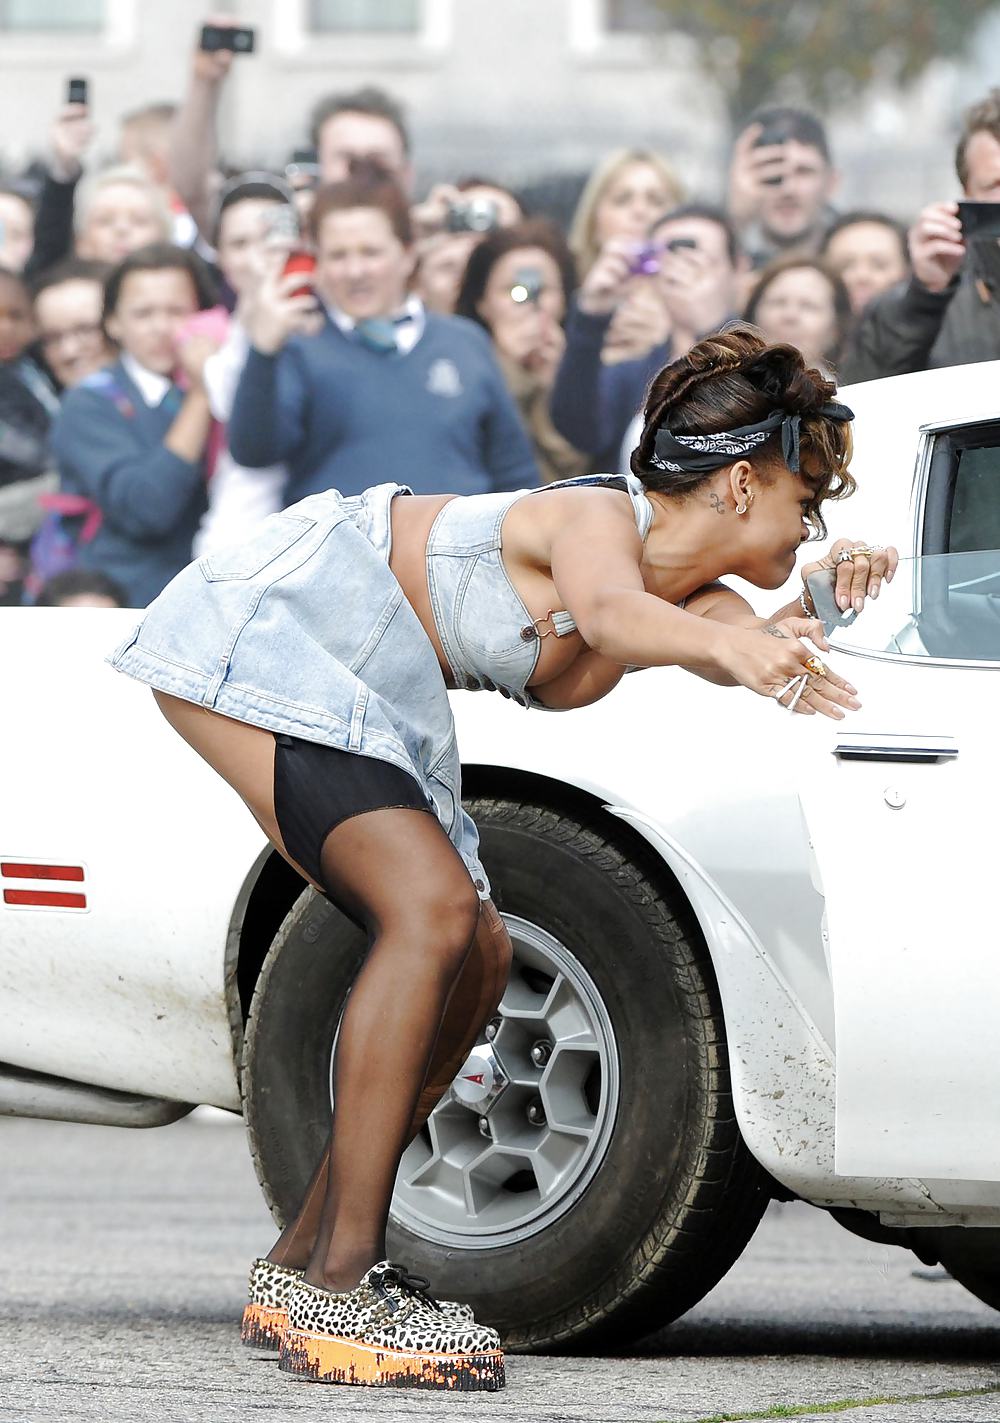 Rihanna filming the music video We Found Love in Ireland #8290464